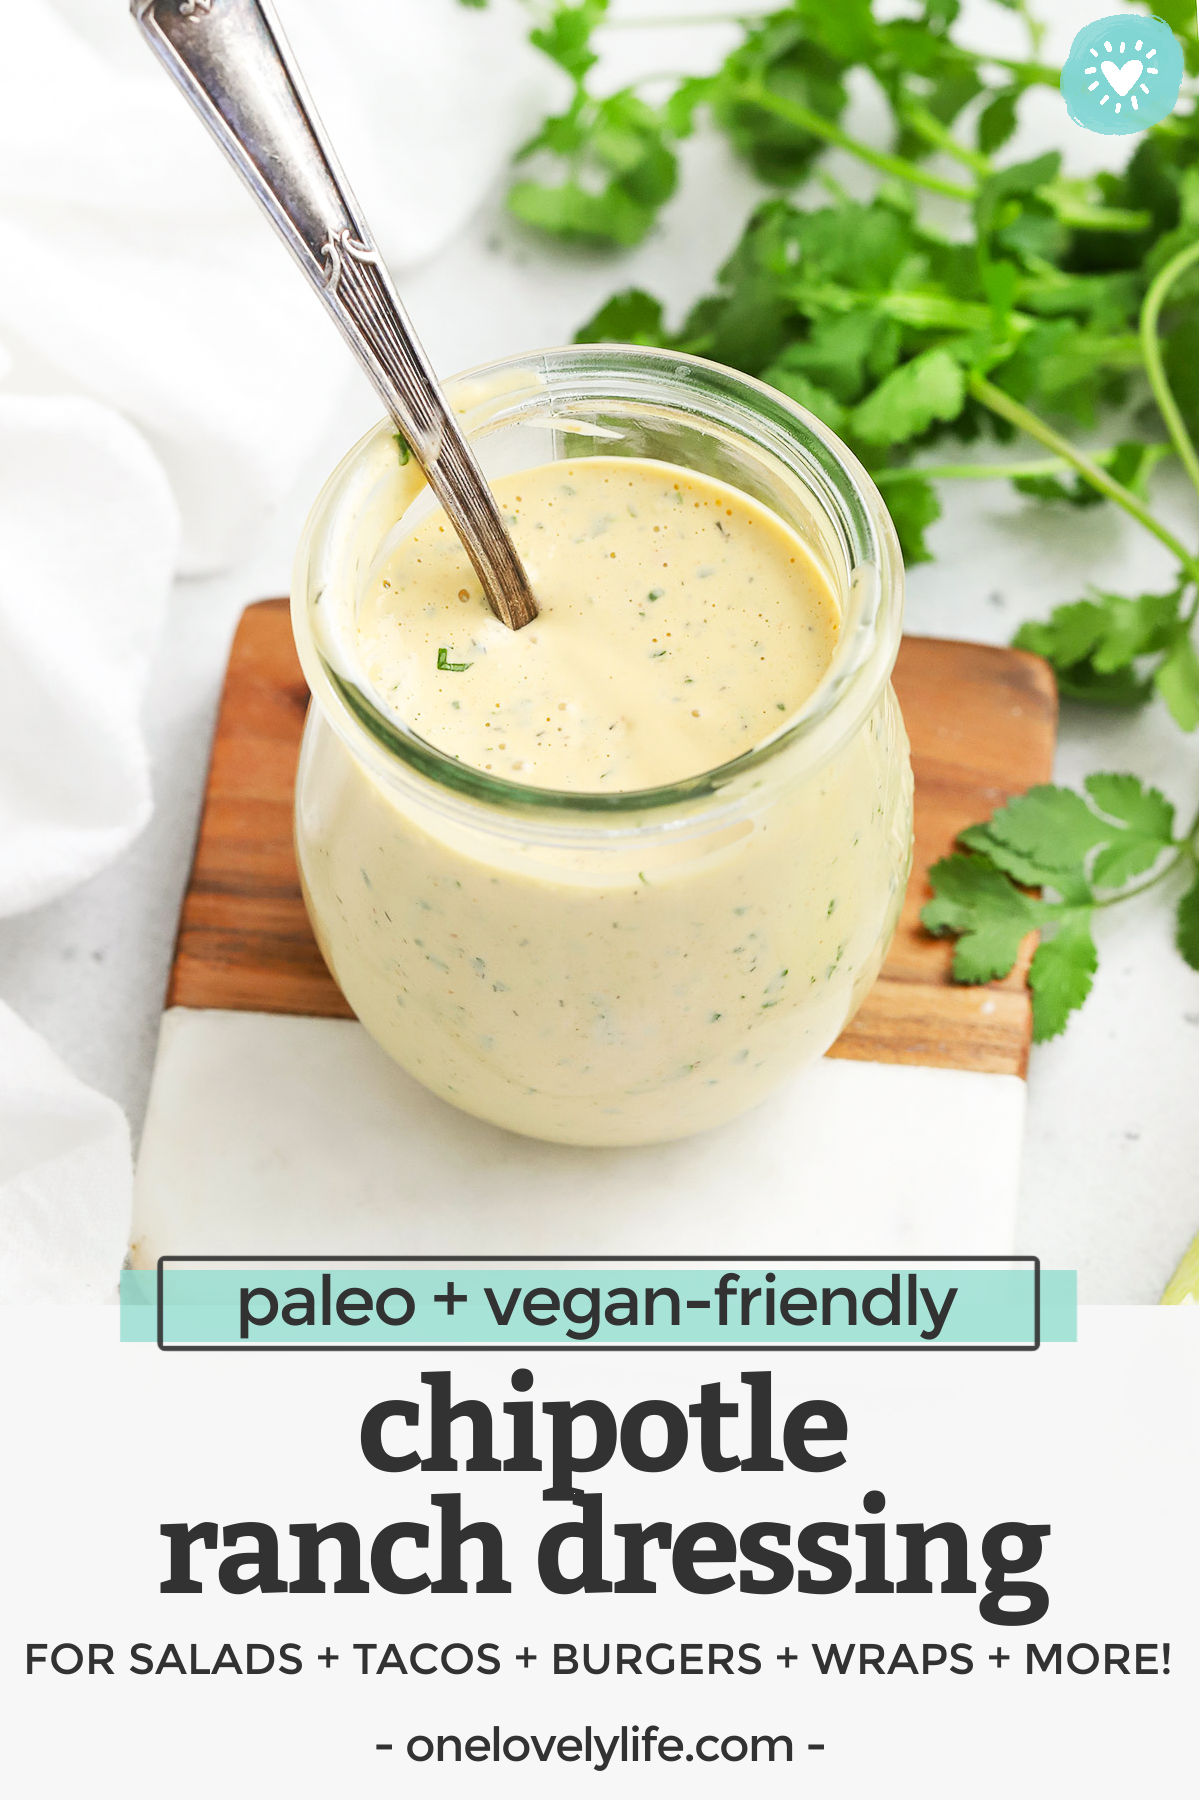 Chipotle Ranch Dressing or Dip - This smoky, slightly spicy ranch dressing is a delicious way to add some kick to your meals. Don't miss our big list of ways to use it! (Dairy-Free, Gluten-Free, Paleo + Vegan Friendly) // Dairy-Free Chipotle Ranch // Vegan Chipotle Ranch // Paleo Chipotle Ranch #ranch #paleo #vegan #dip